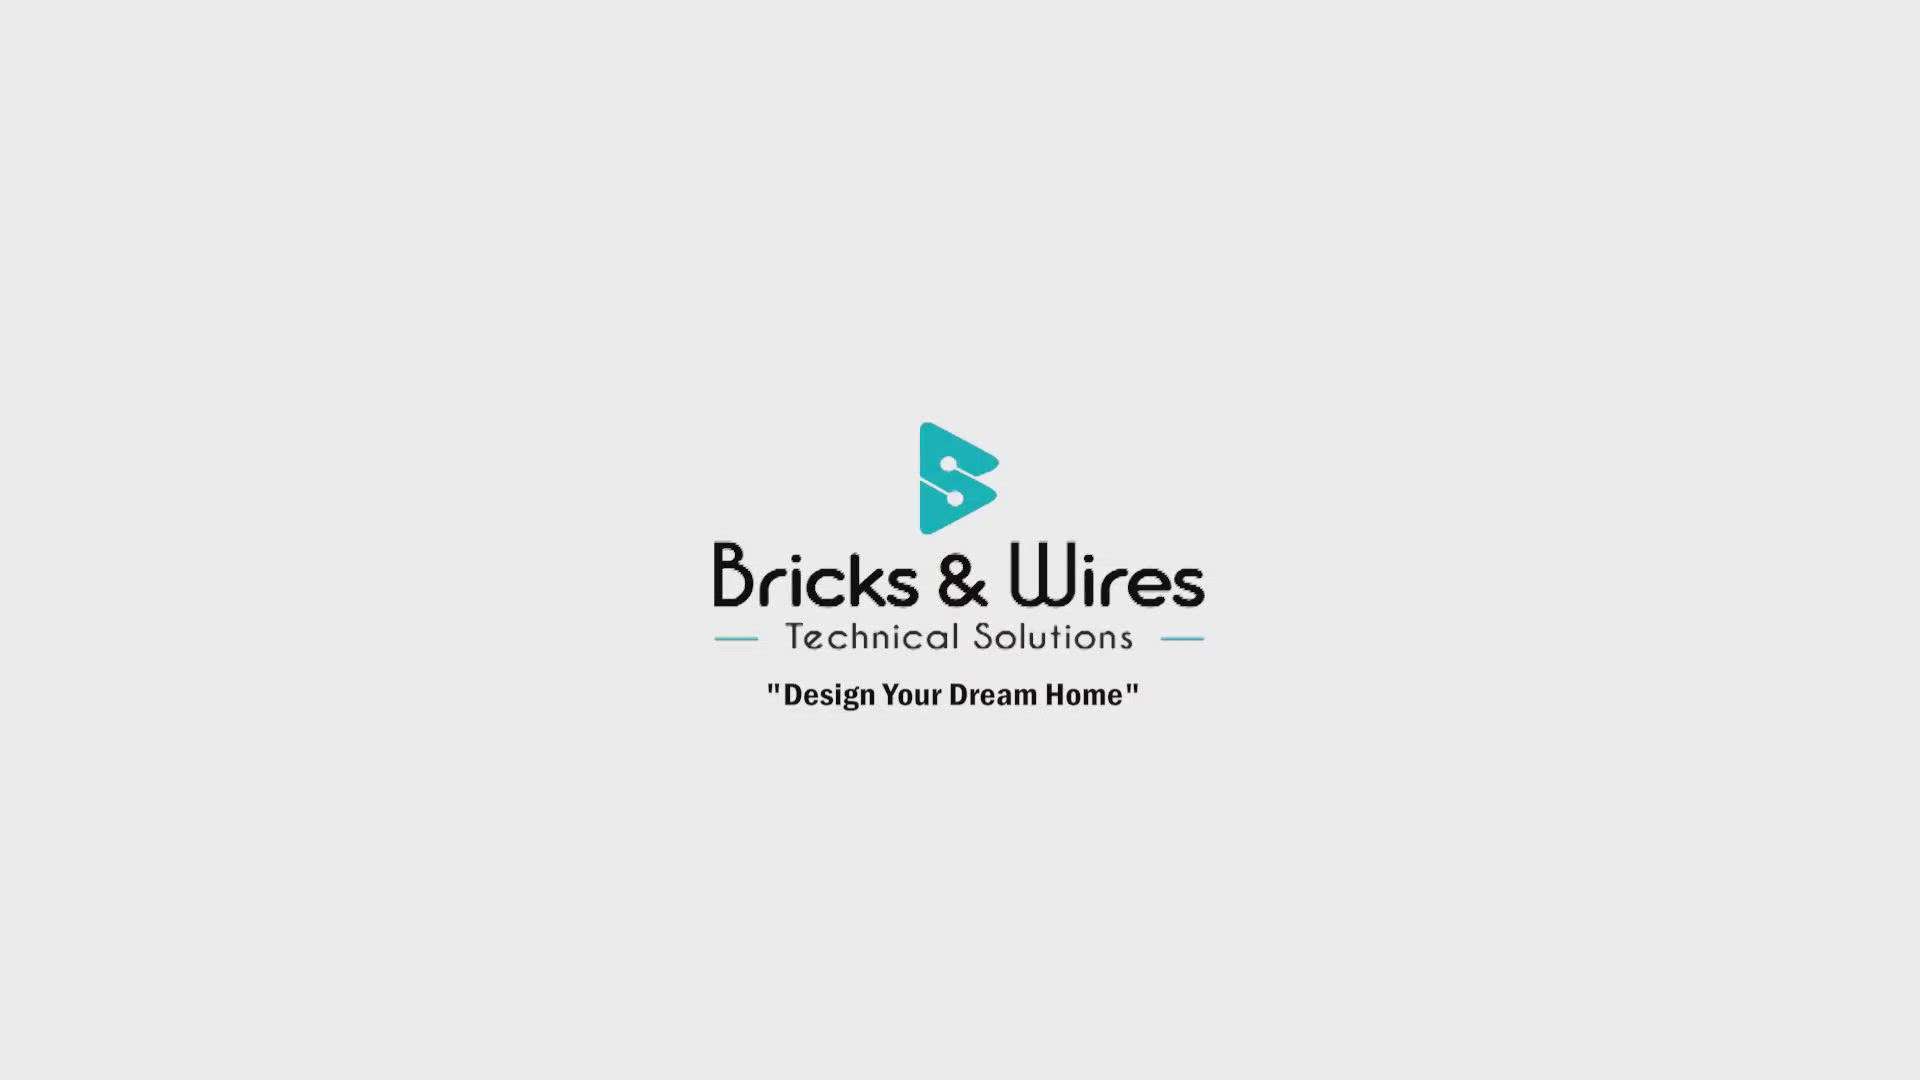 Living, Furniture, Staircase, Dining, Home Decor, Kitchen, Bedroom Designs by Architect Bricks and Wires, Kozhikode | Kolo